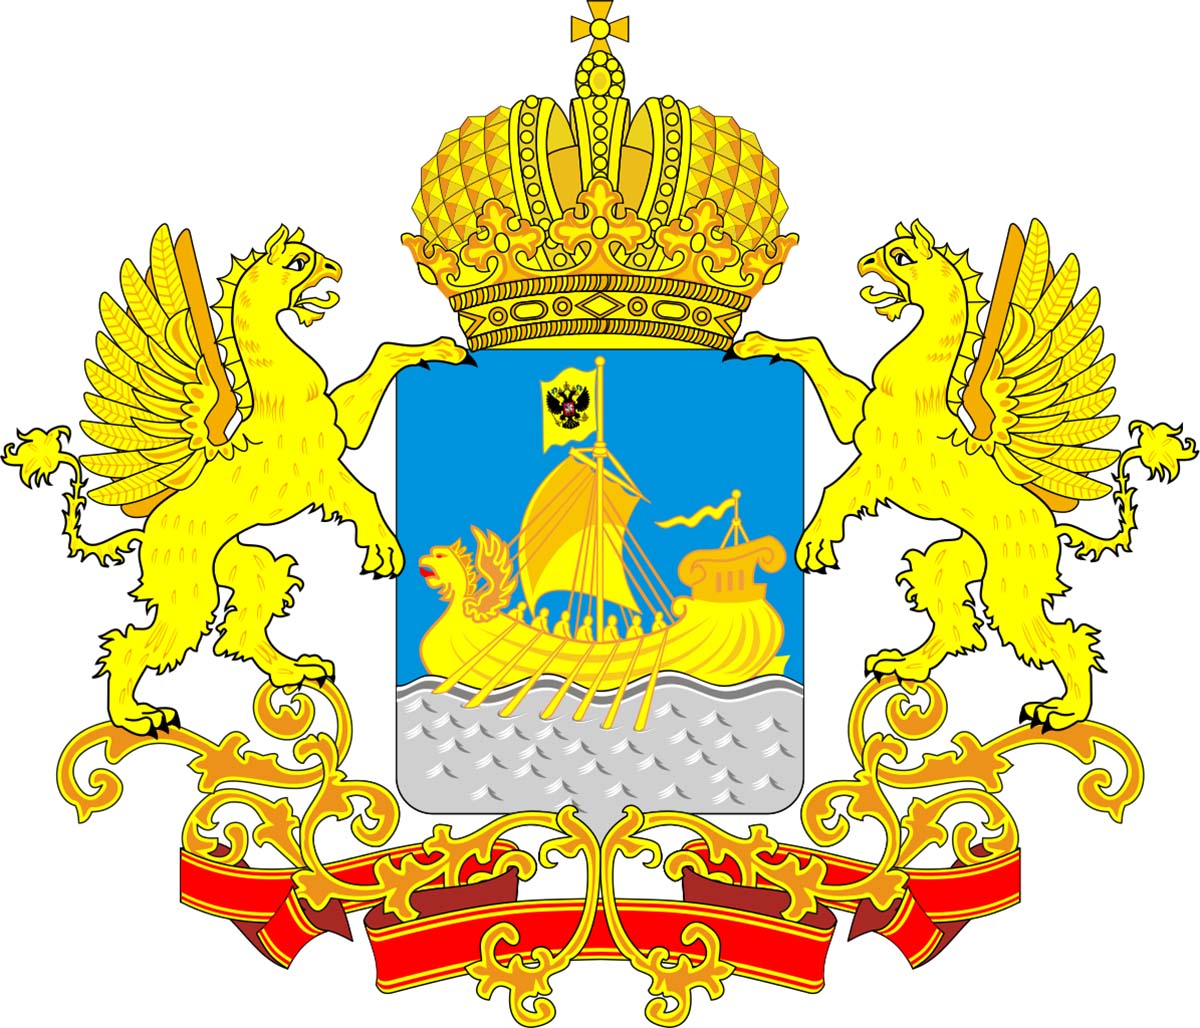 Coat of arms of Kostroma Oblast